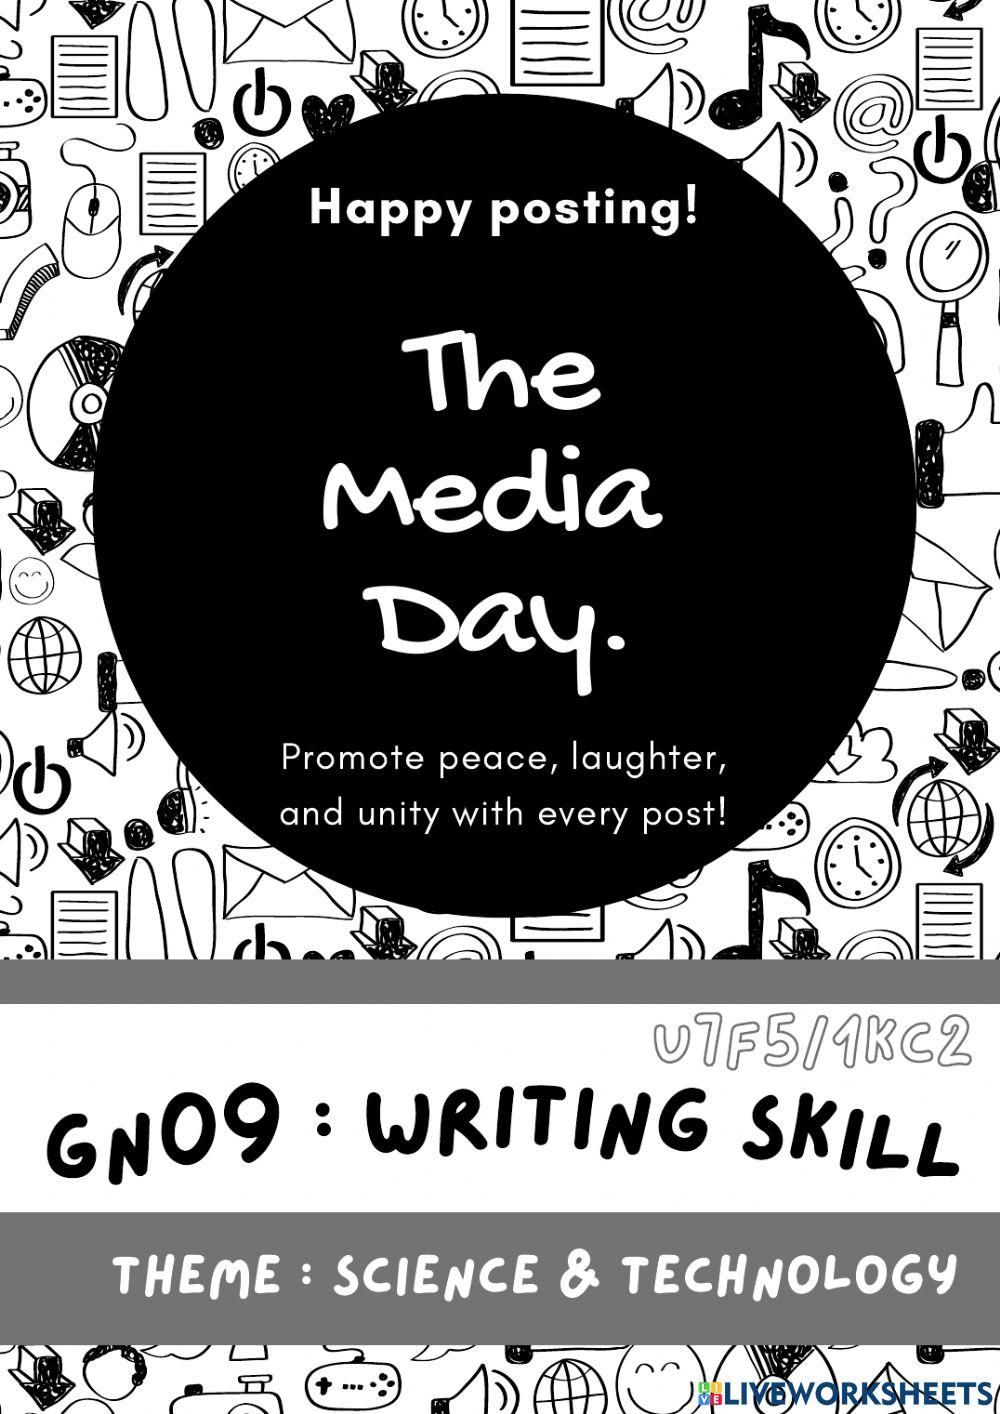 GN09 - Writing Skill - The Media Day